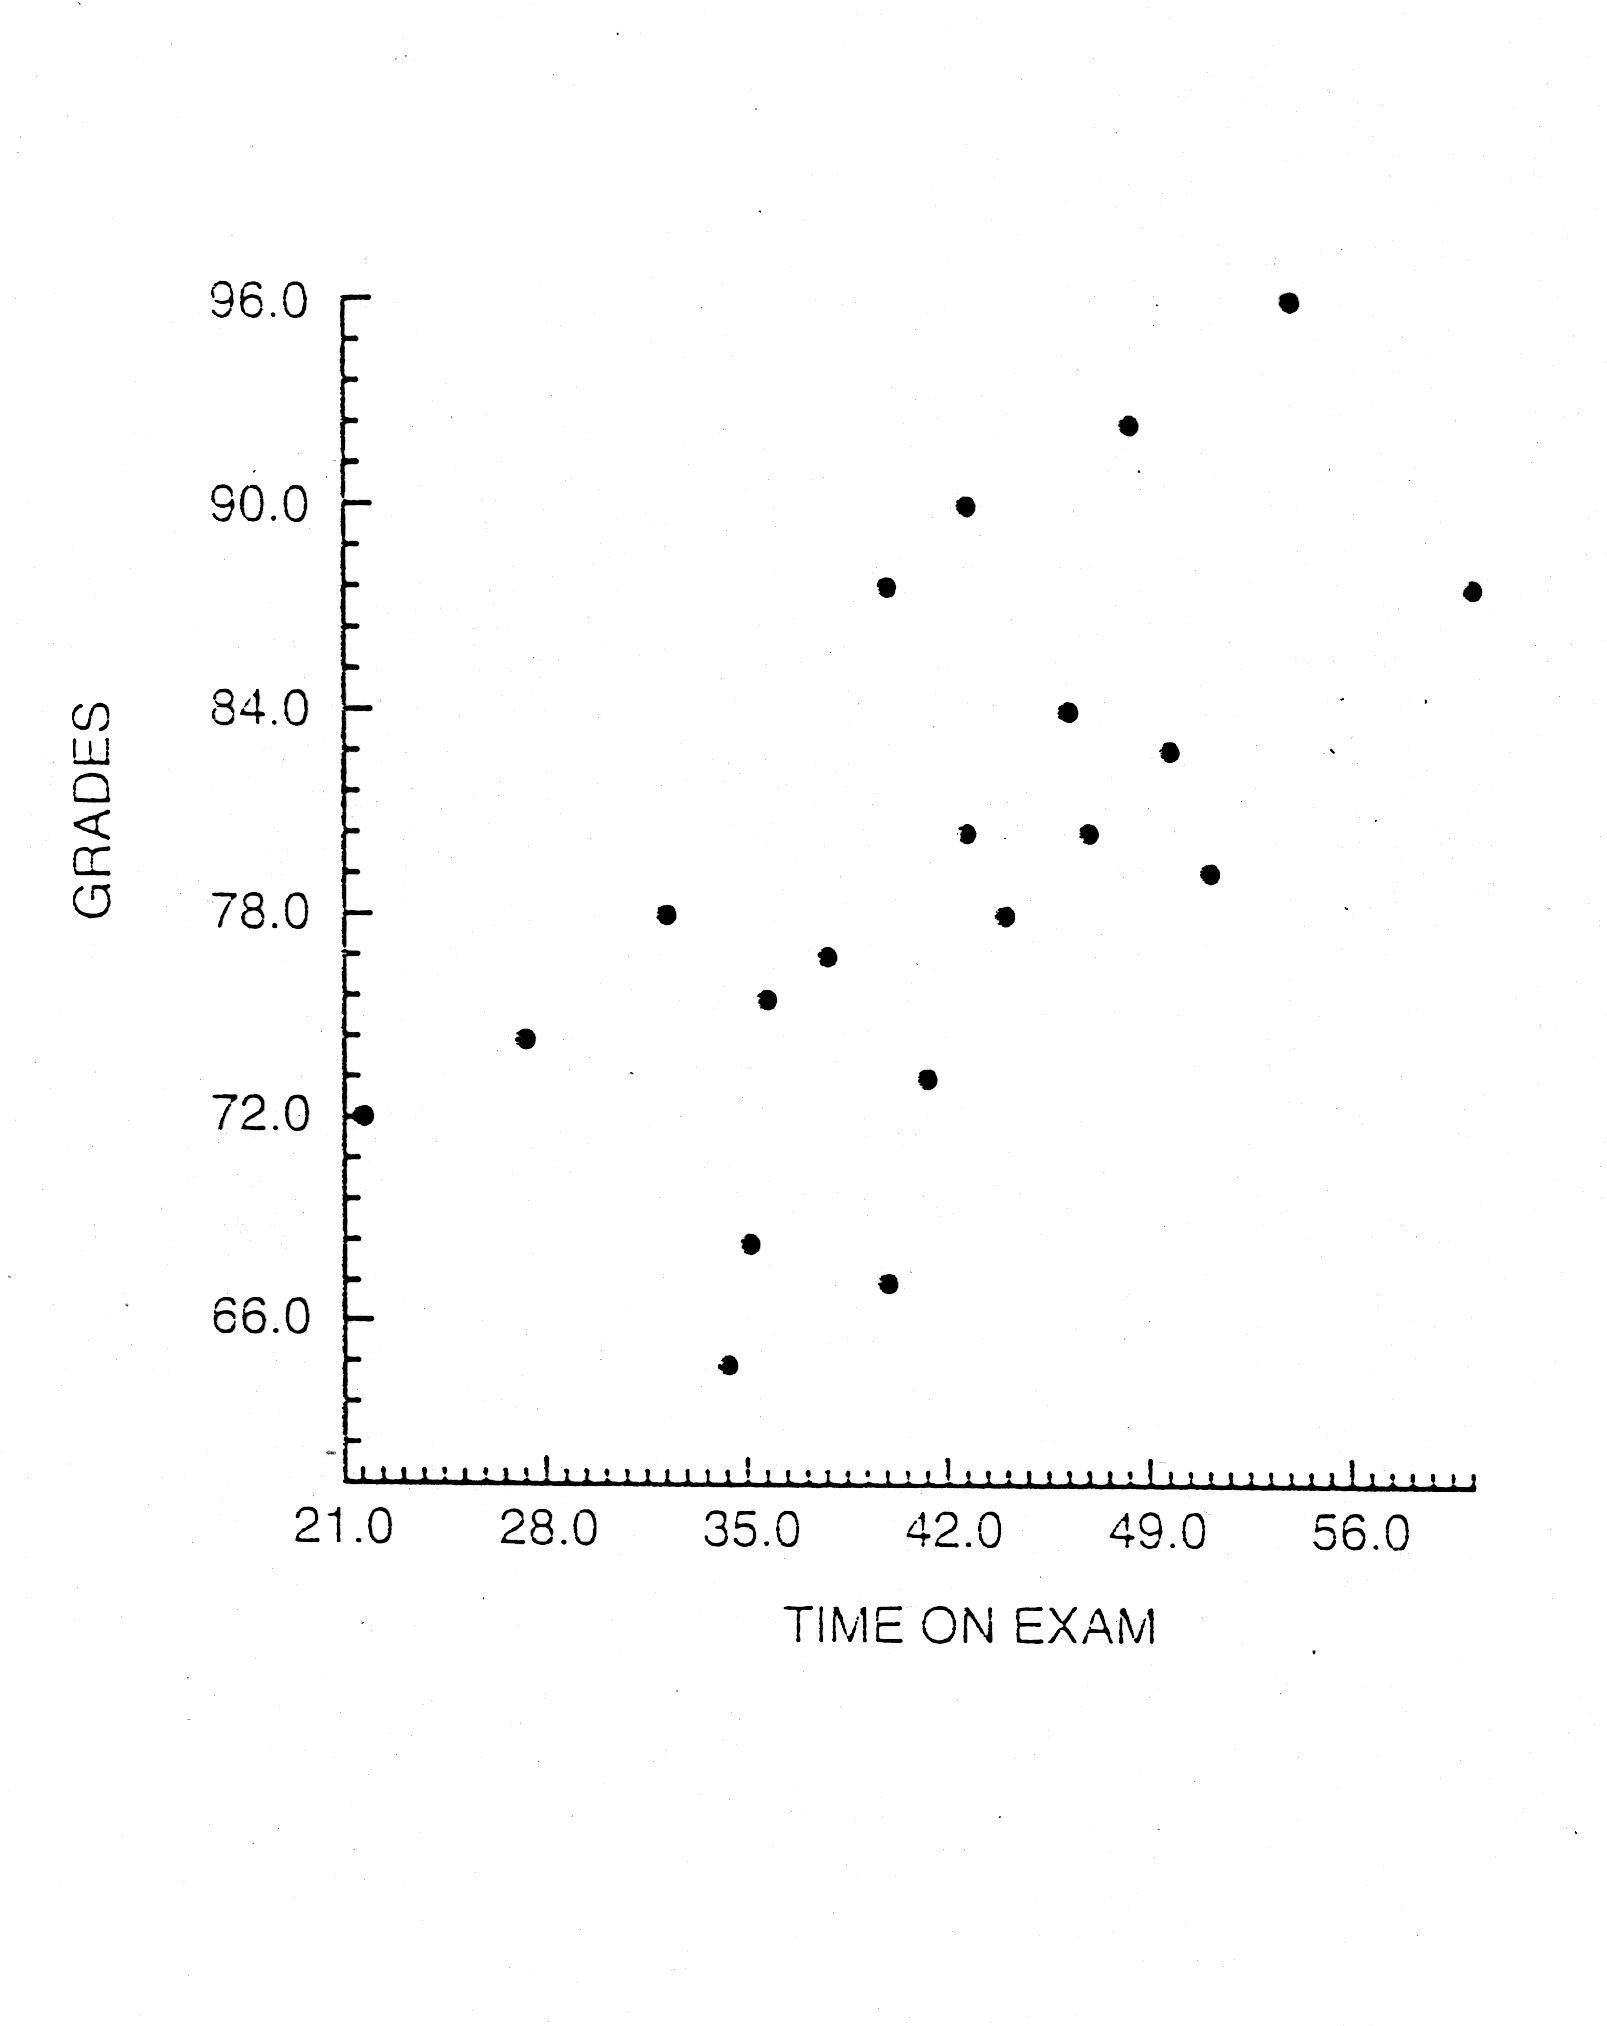 Correlation for study A. Correlation coefficients ( R 2 ) for